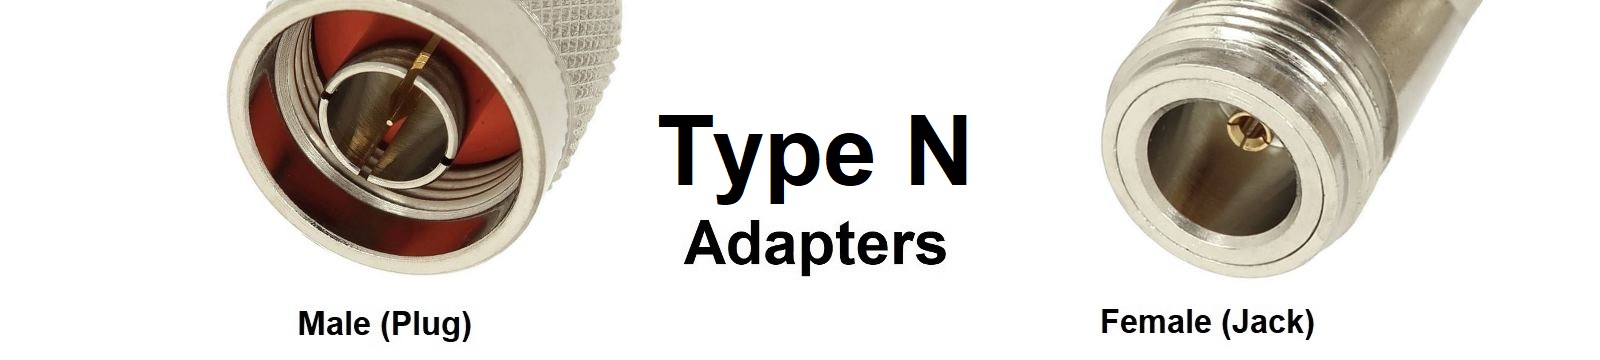 Type N Adapters Category Banner - Max-Gain Systems, Inc.